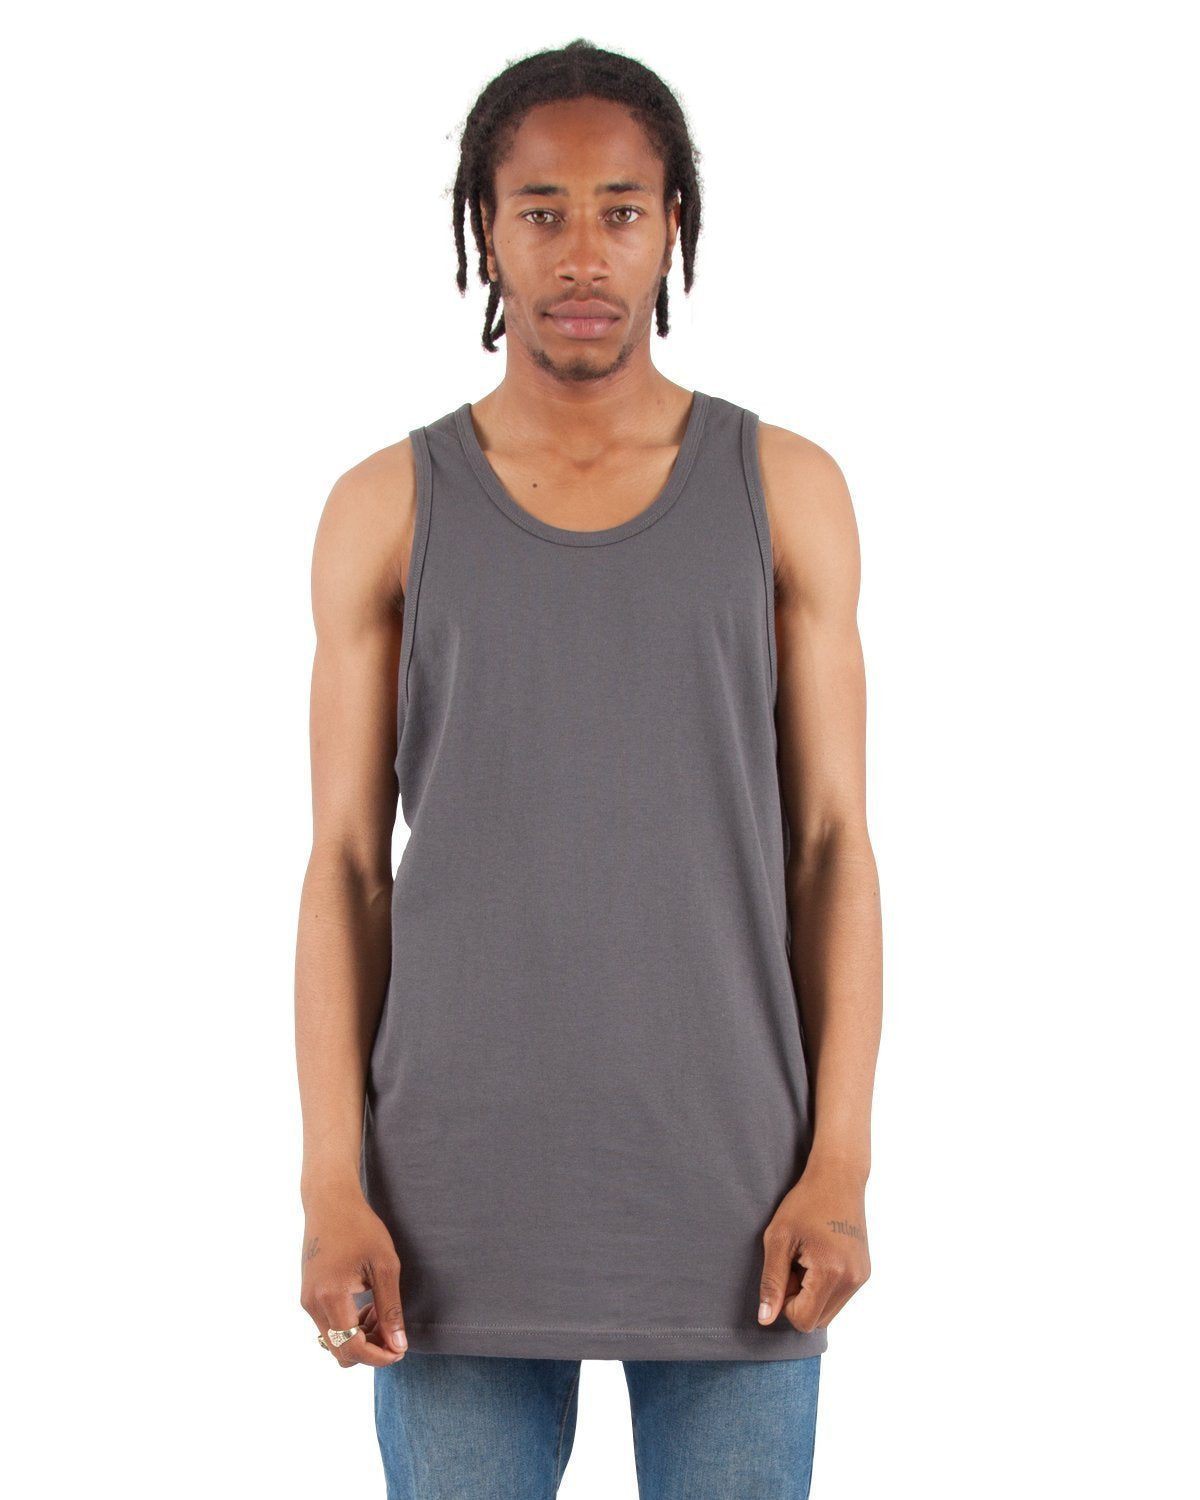 Hanes Mens Round Neck Sleeveless Tank Top - JCPenney